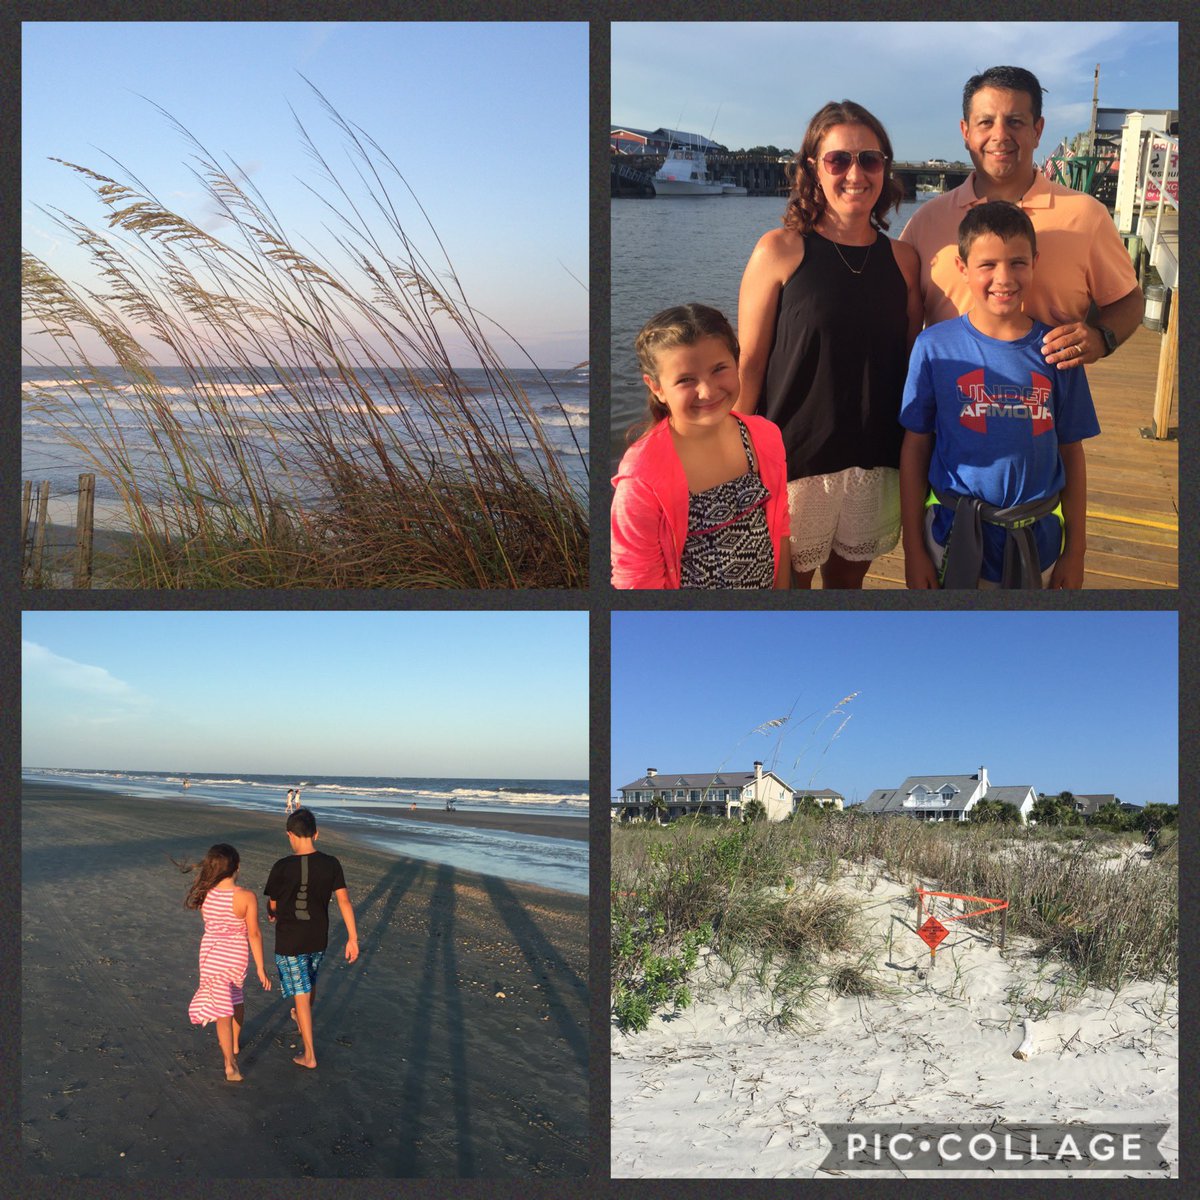 Day 4: My FAVORITE place on earth is @isleofpalms🏝, South Carolina!!🏖#prideofLL #bpsne